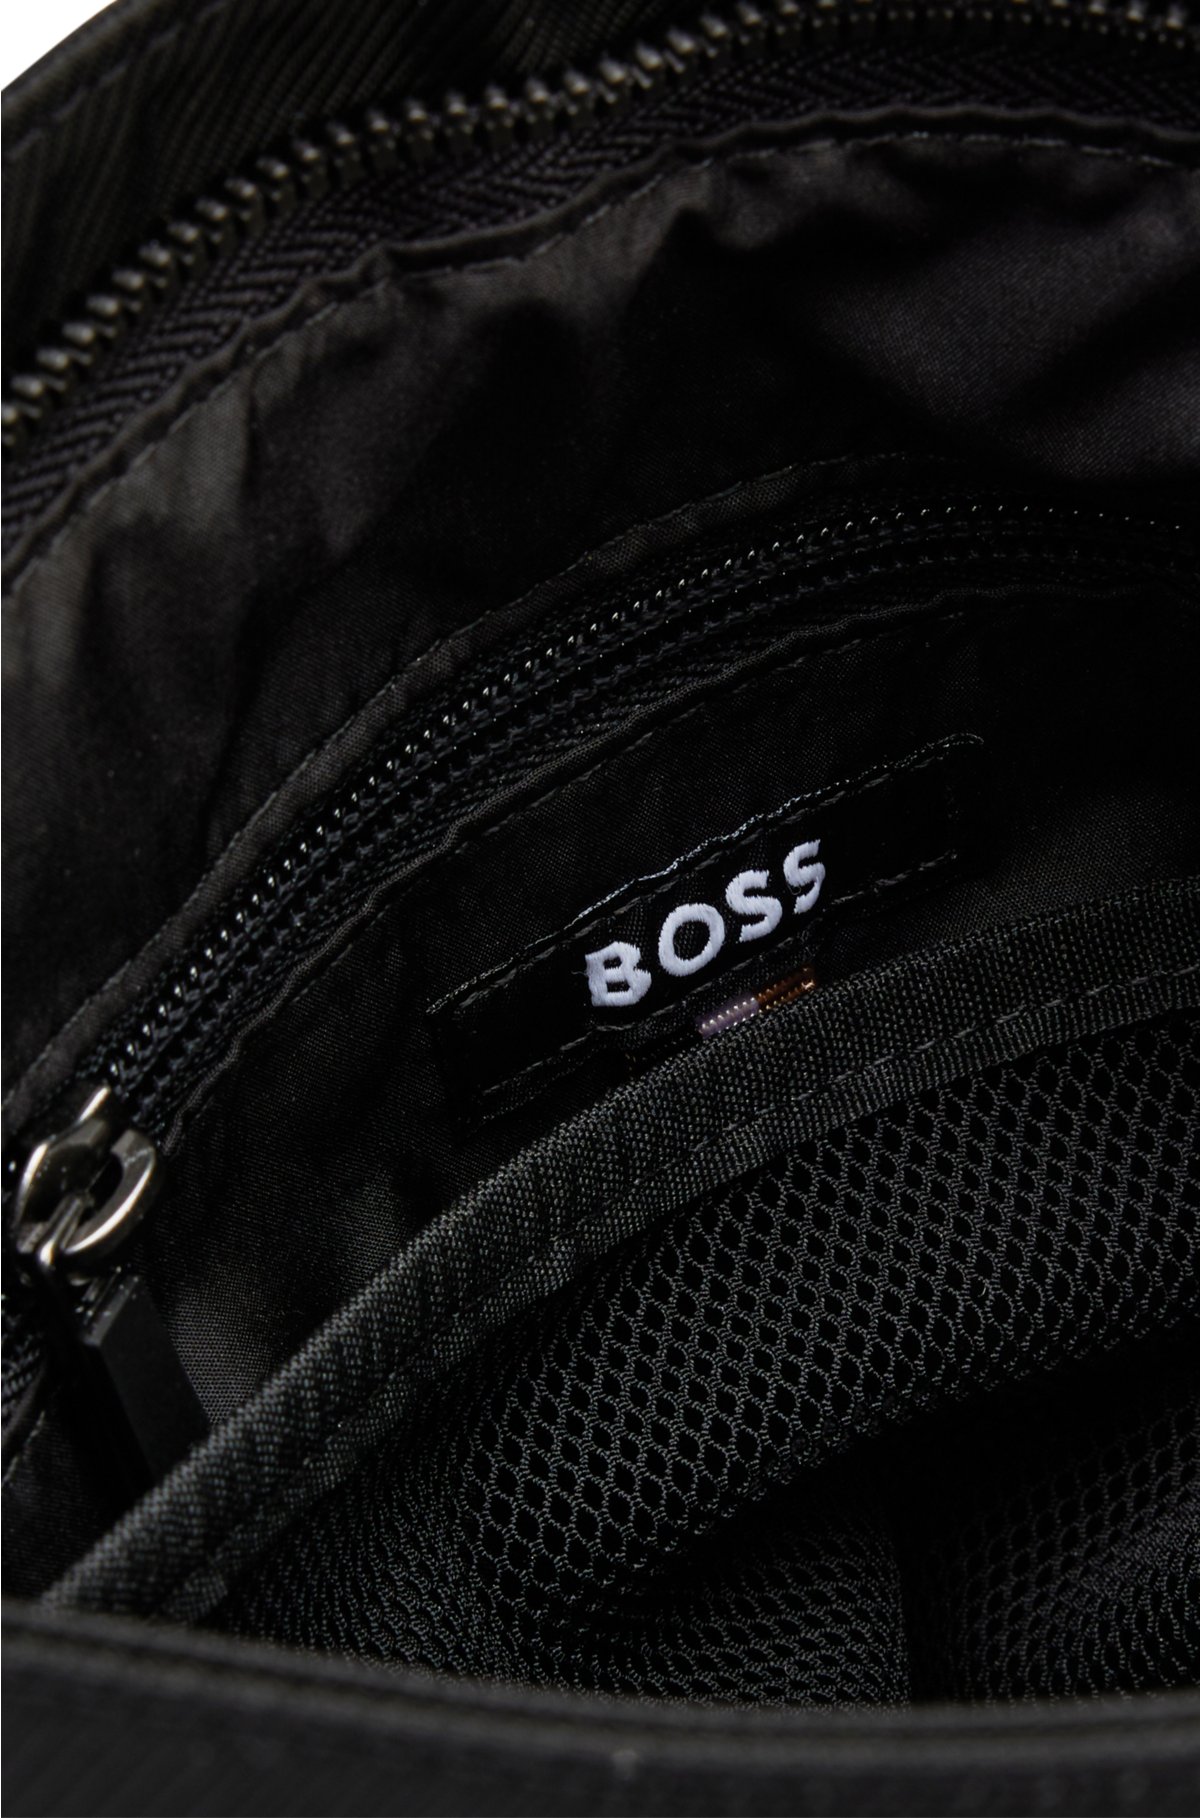 Boss Men's Boss & NBA Envelope Bag in Recycled Fabric with Collaborative Branding - Patterned One-Size